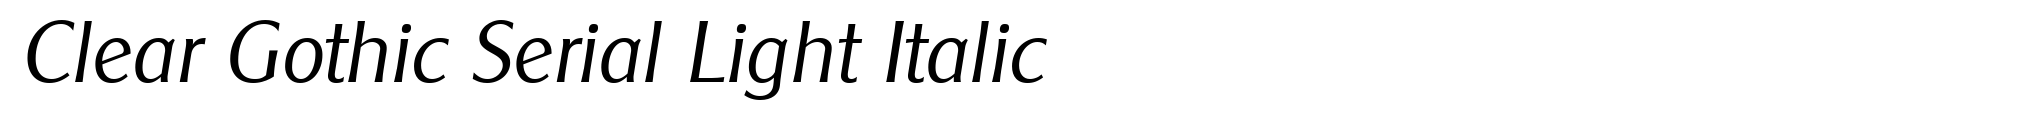 Clear Gothic Serial Light Italic image